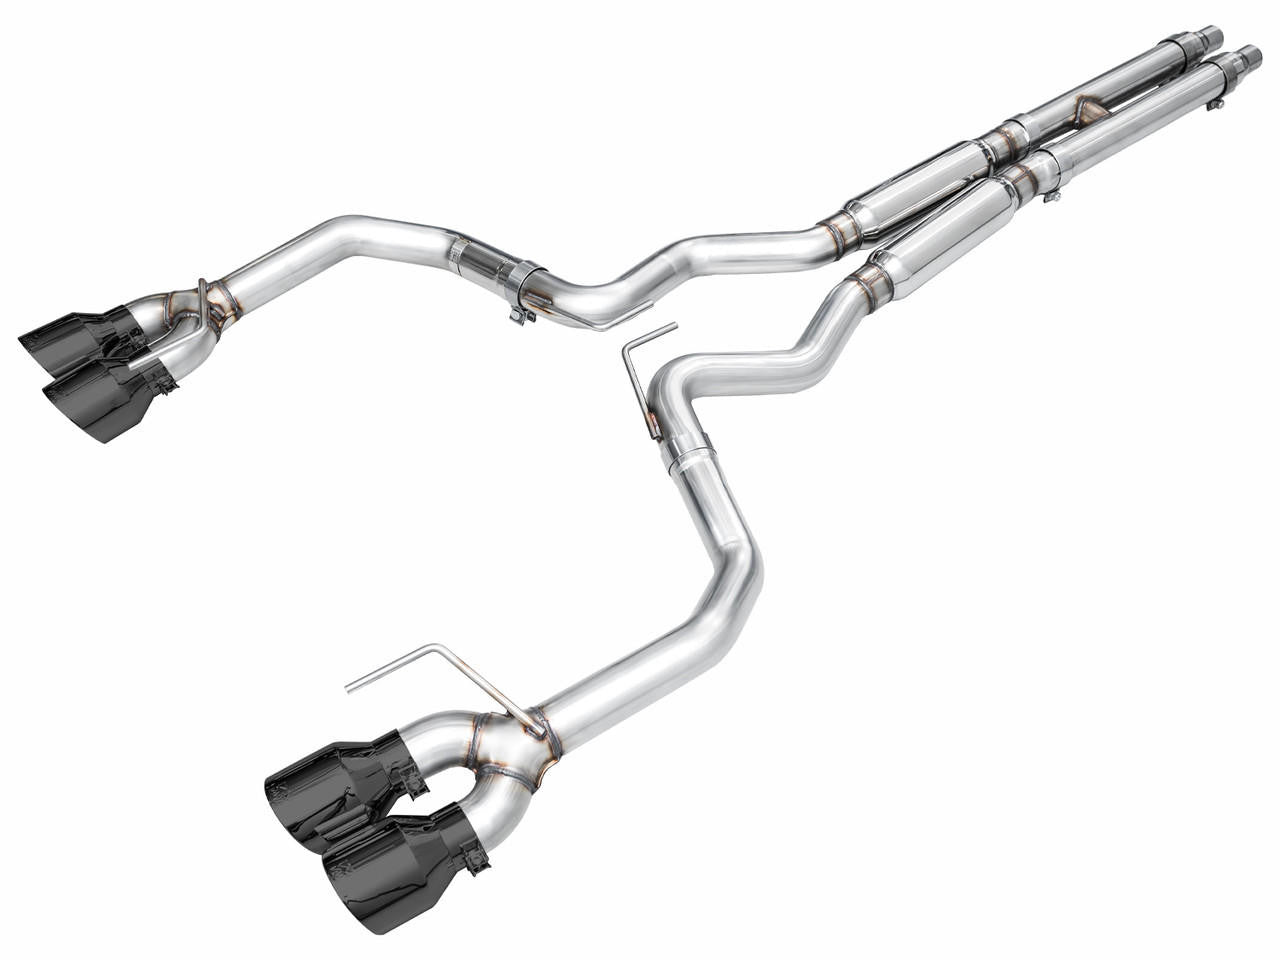 AWE Tuning AWE SwitchPath Exhaust for S650 Mustang Dark Horse - Quad Diamond Black Tips 3025-43375 